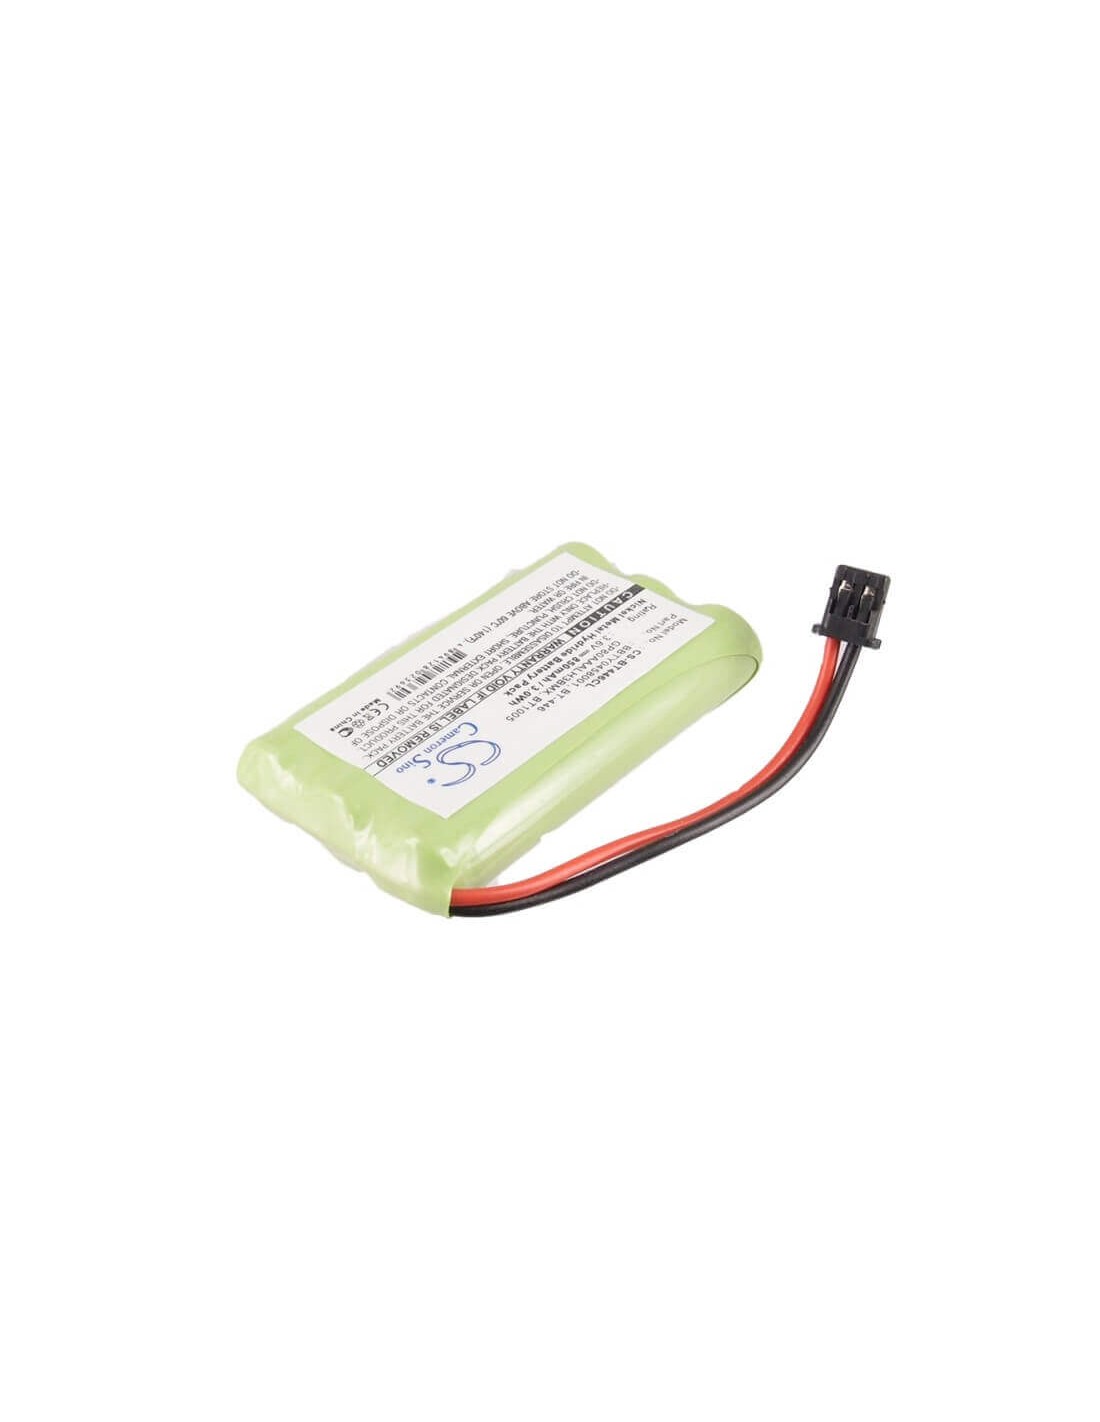 Battery for Gp, Gp80aaalh3bmx 3.6V, 800mAh - 2.88Wh